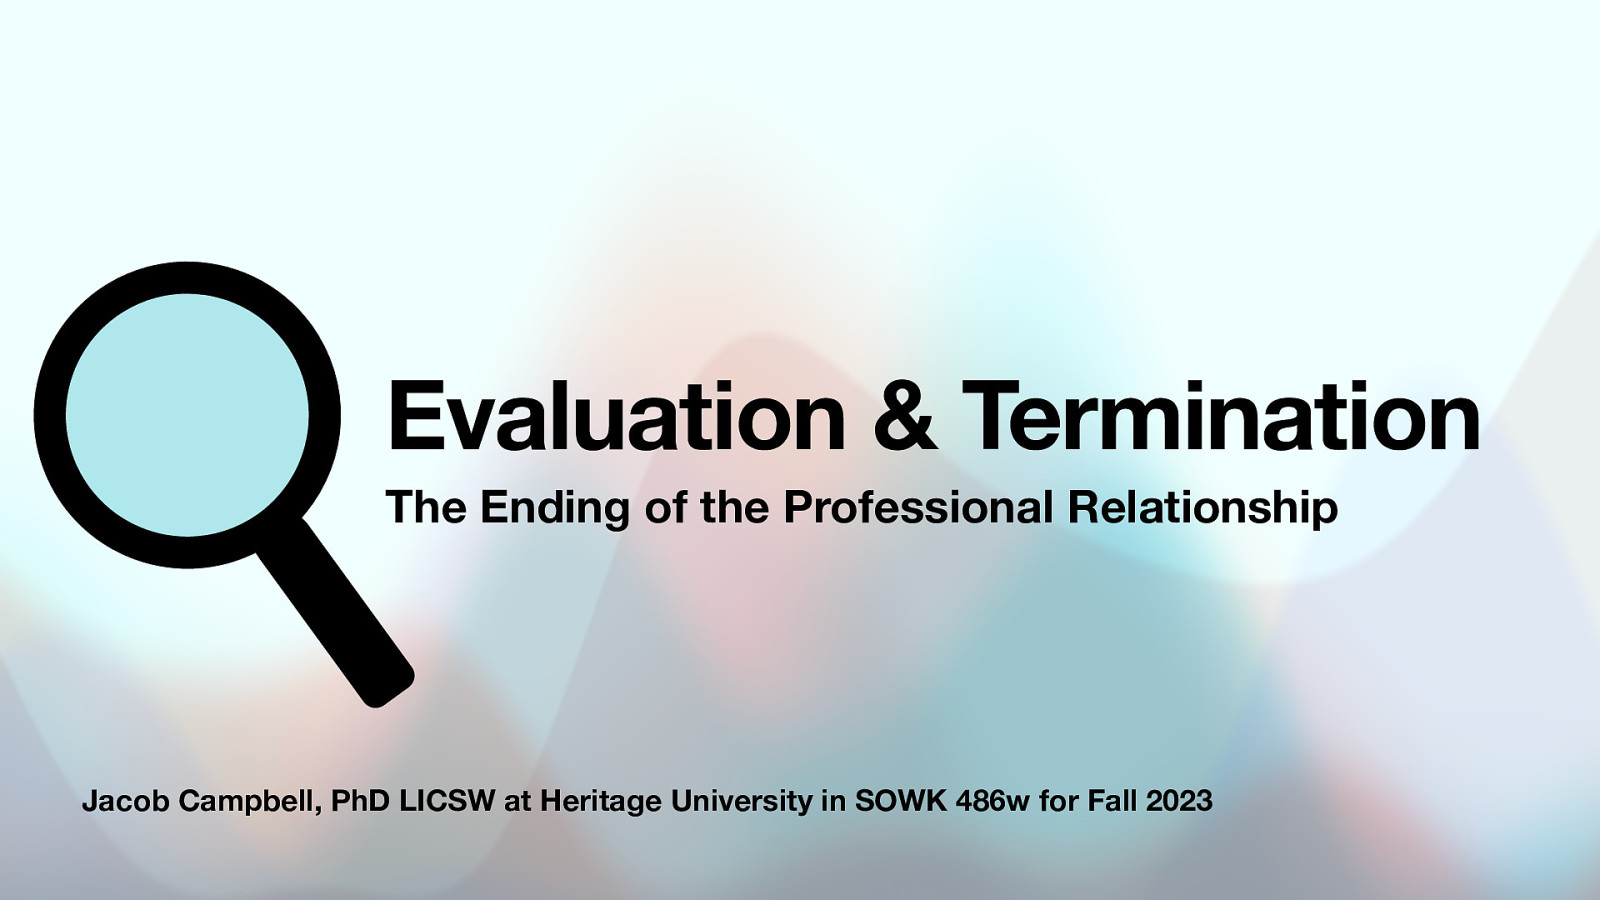 Fall 2023 SOWK 486w - Week 15 - Evaluation and Termination